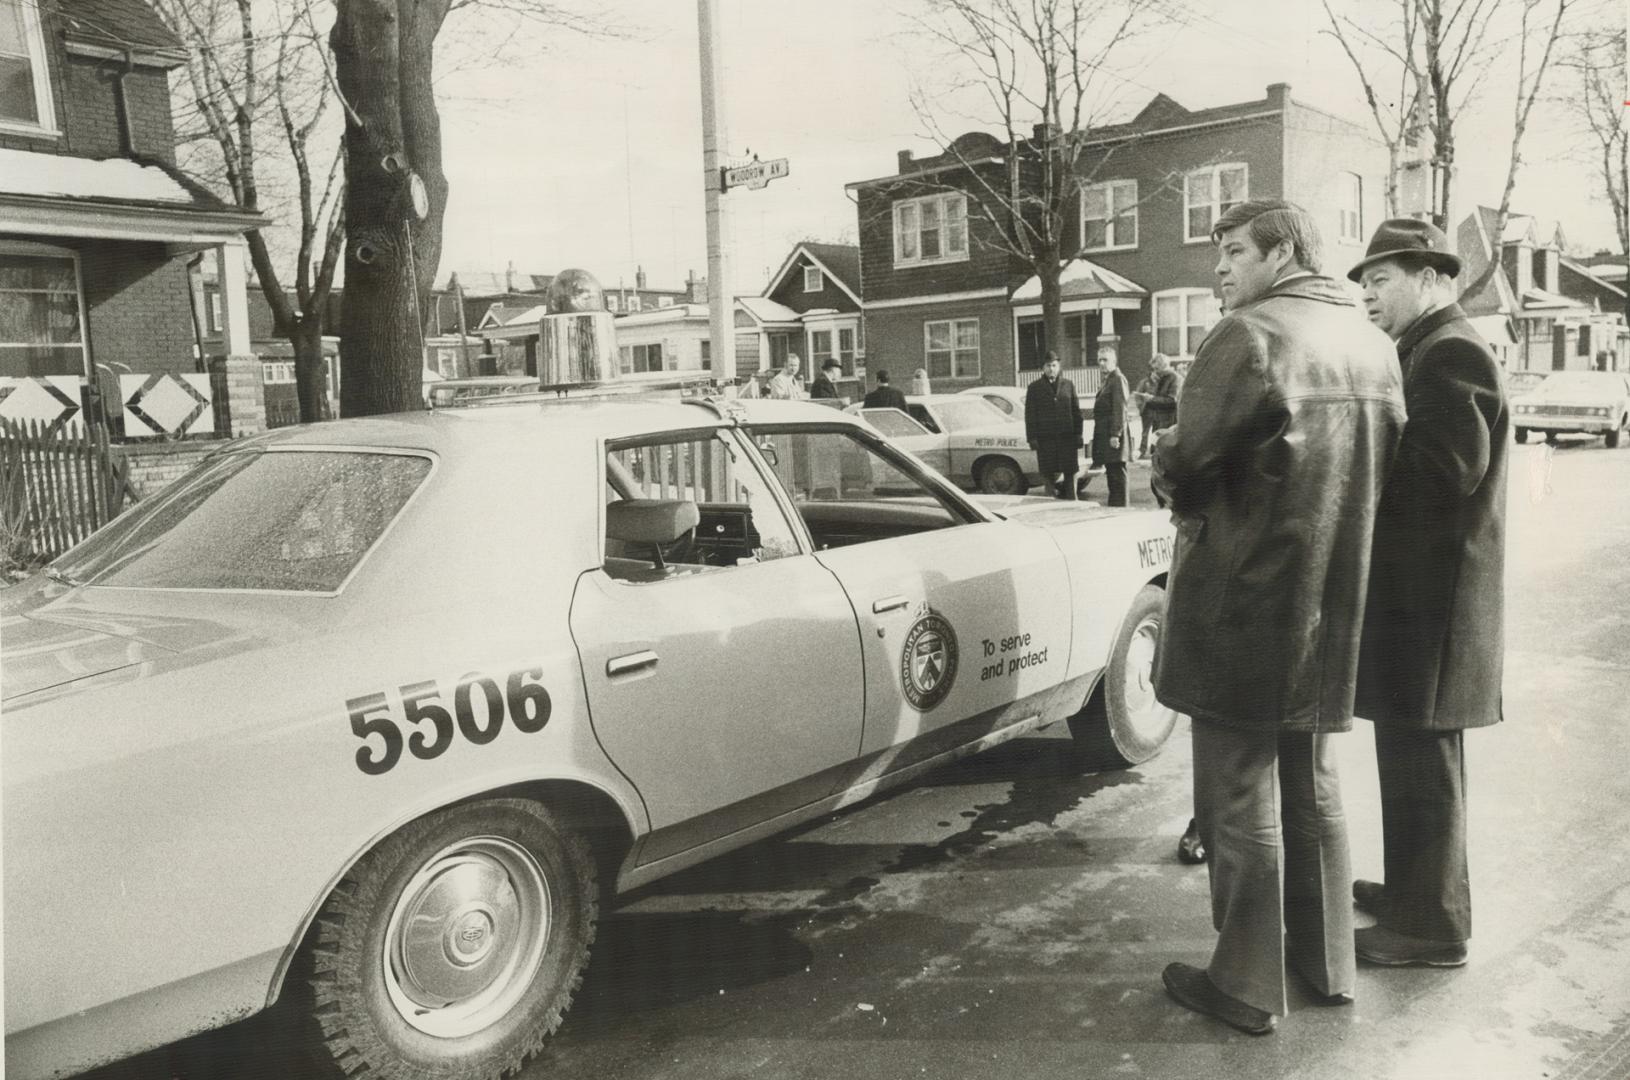 Shattered windows of cruiser are examined by police officers after the fatal shooting of Constable Leslie Maitland today at Drayton and Woodrow Aves. (...)